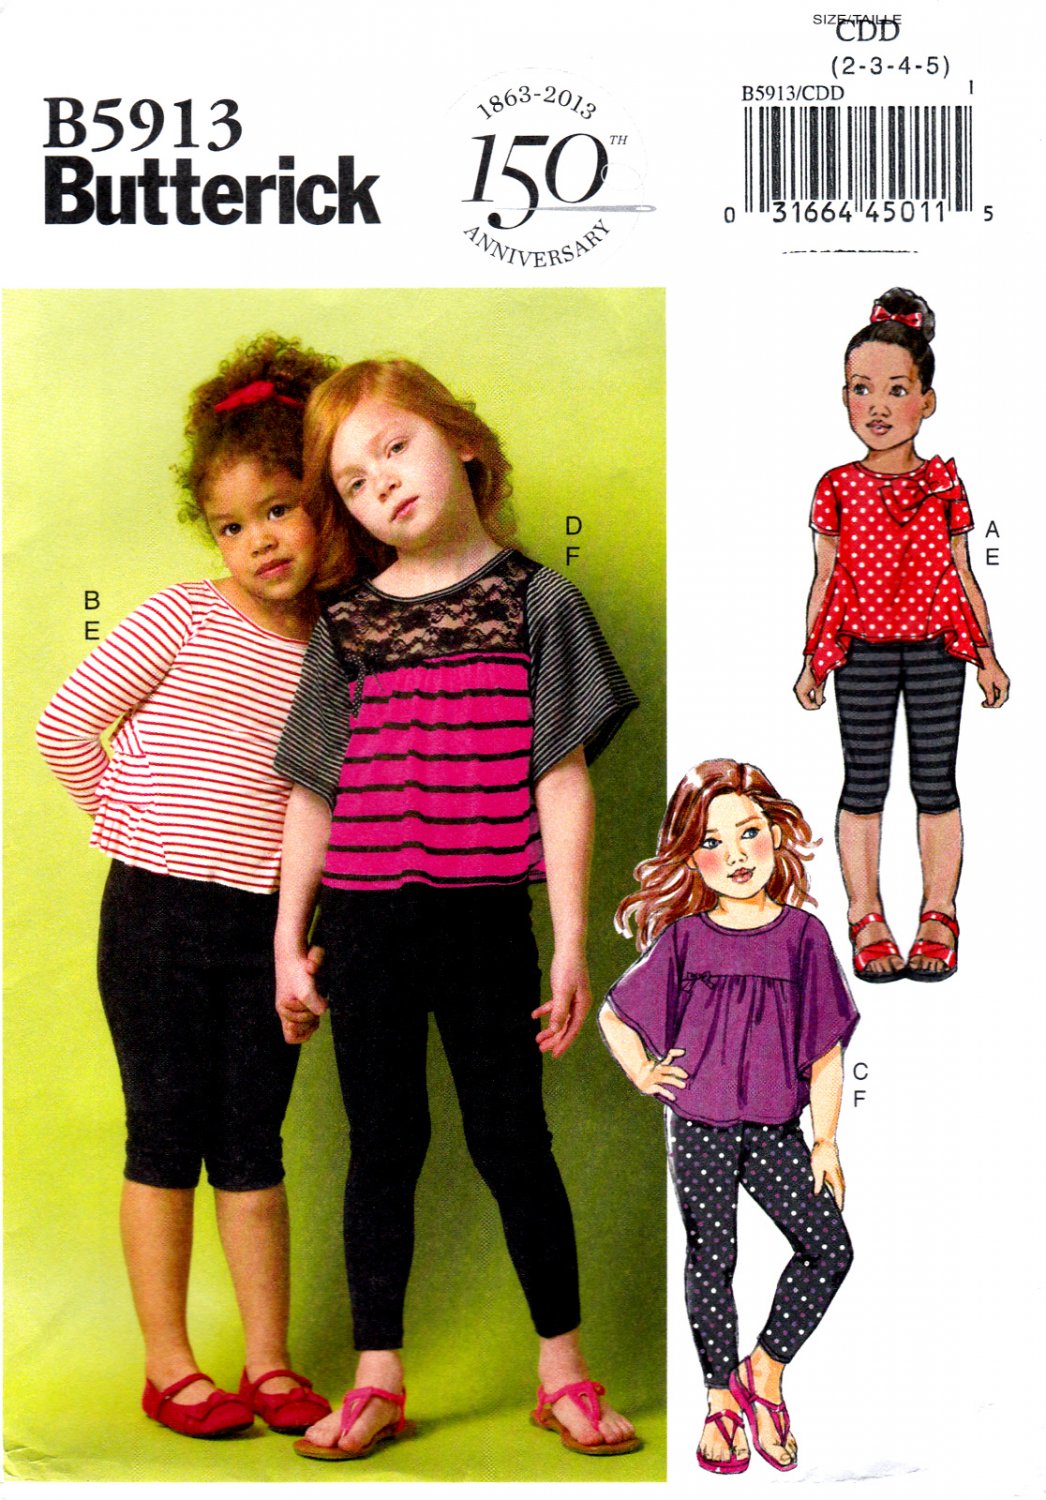 Butterick B5913 5913 Girls Pullover Tops Leggings Easy Sewing Pattern Sizes 2-3-4-5 Varying Sleeves